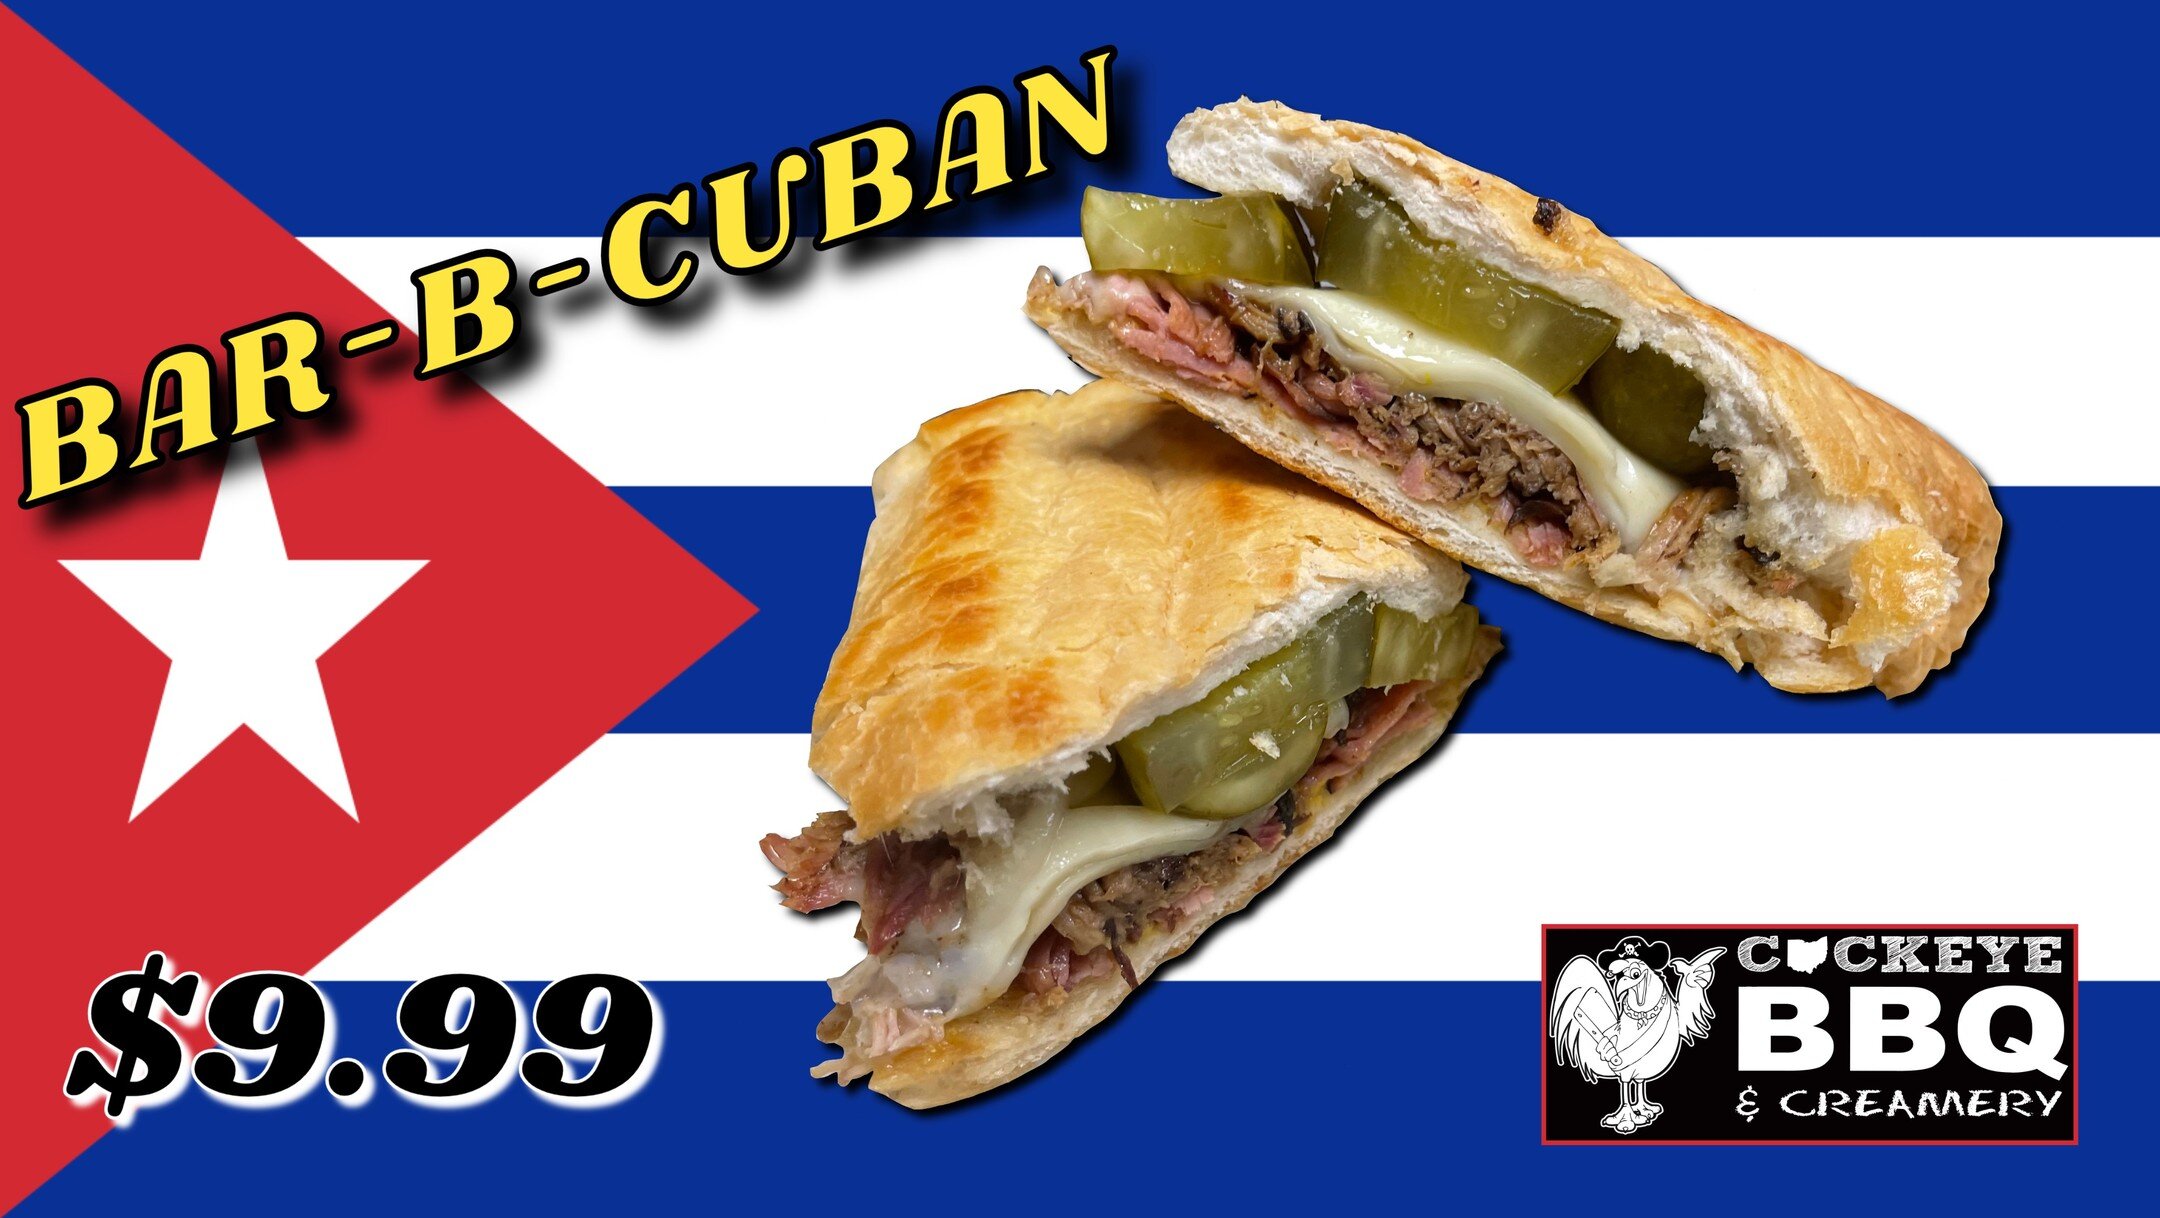 Yessir! Back for a limited time! Our BAR-B-CUBAN!
House-Cured Smoked Cottage Ham, Hand-Pulled Pork Shoulder, Swiss Cheese, Horsey Pickles, Yellow Mustard, and Yellowbelly BBQ Sauce. Pressed on a Crispy Baguette. 
We'll have em until we don't!
#MoreTh